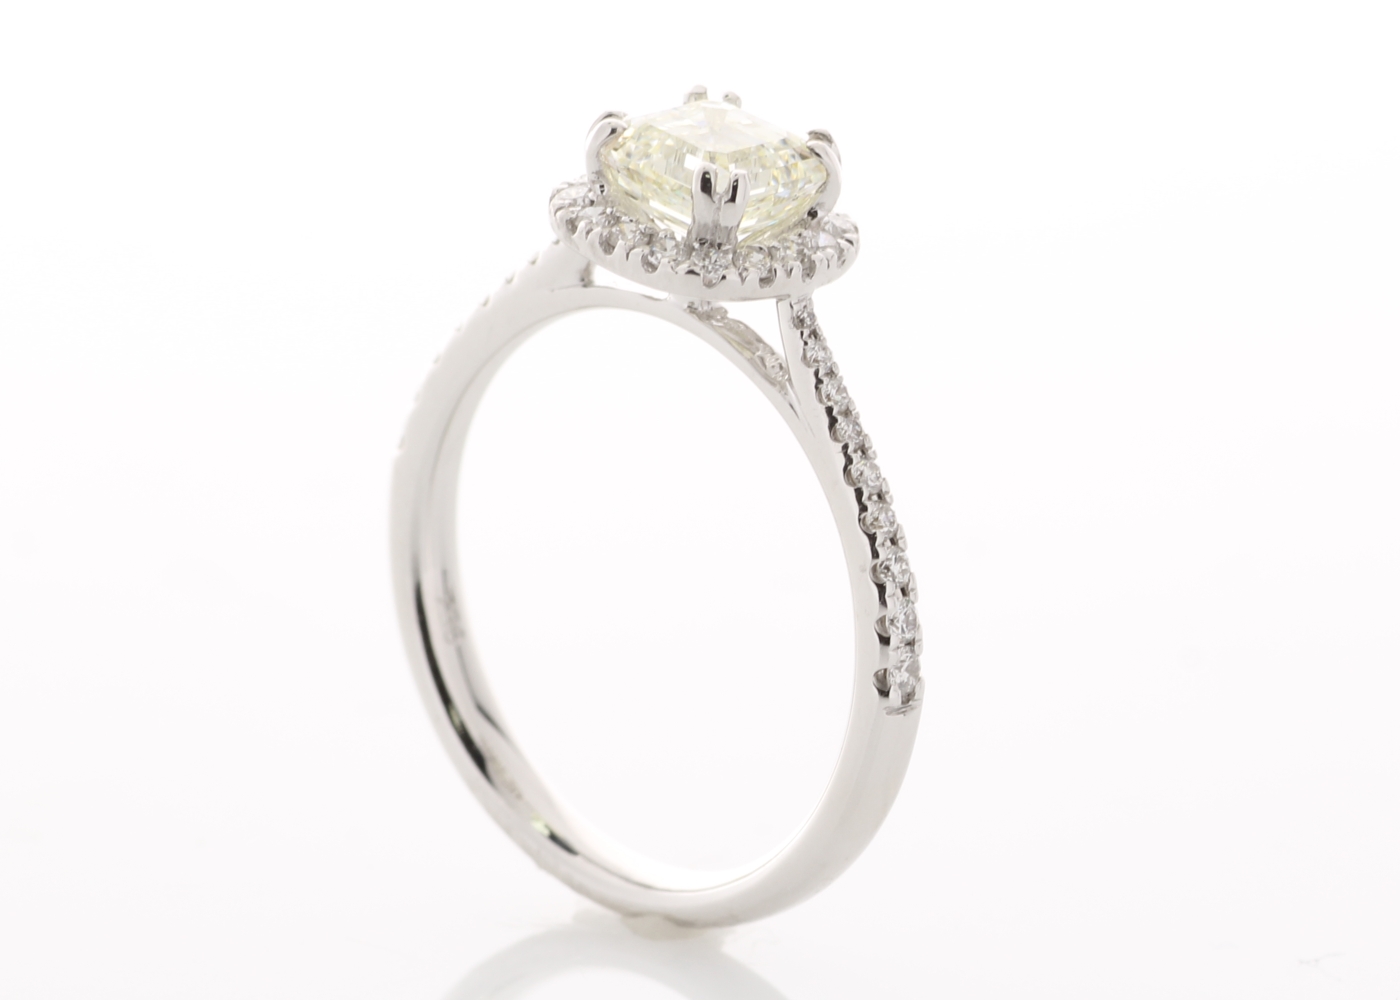 18ct White Gold Single Stone With Halo Setting Ring (1.01) 1.27 Carats - Image 5 of 6